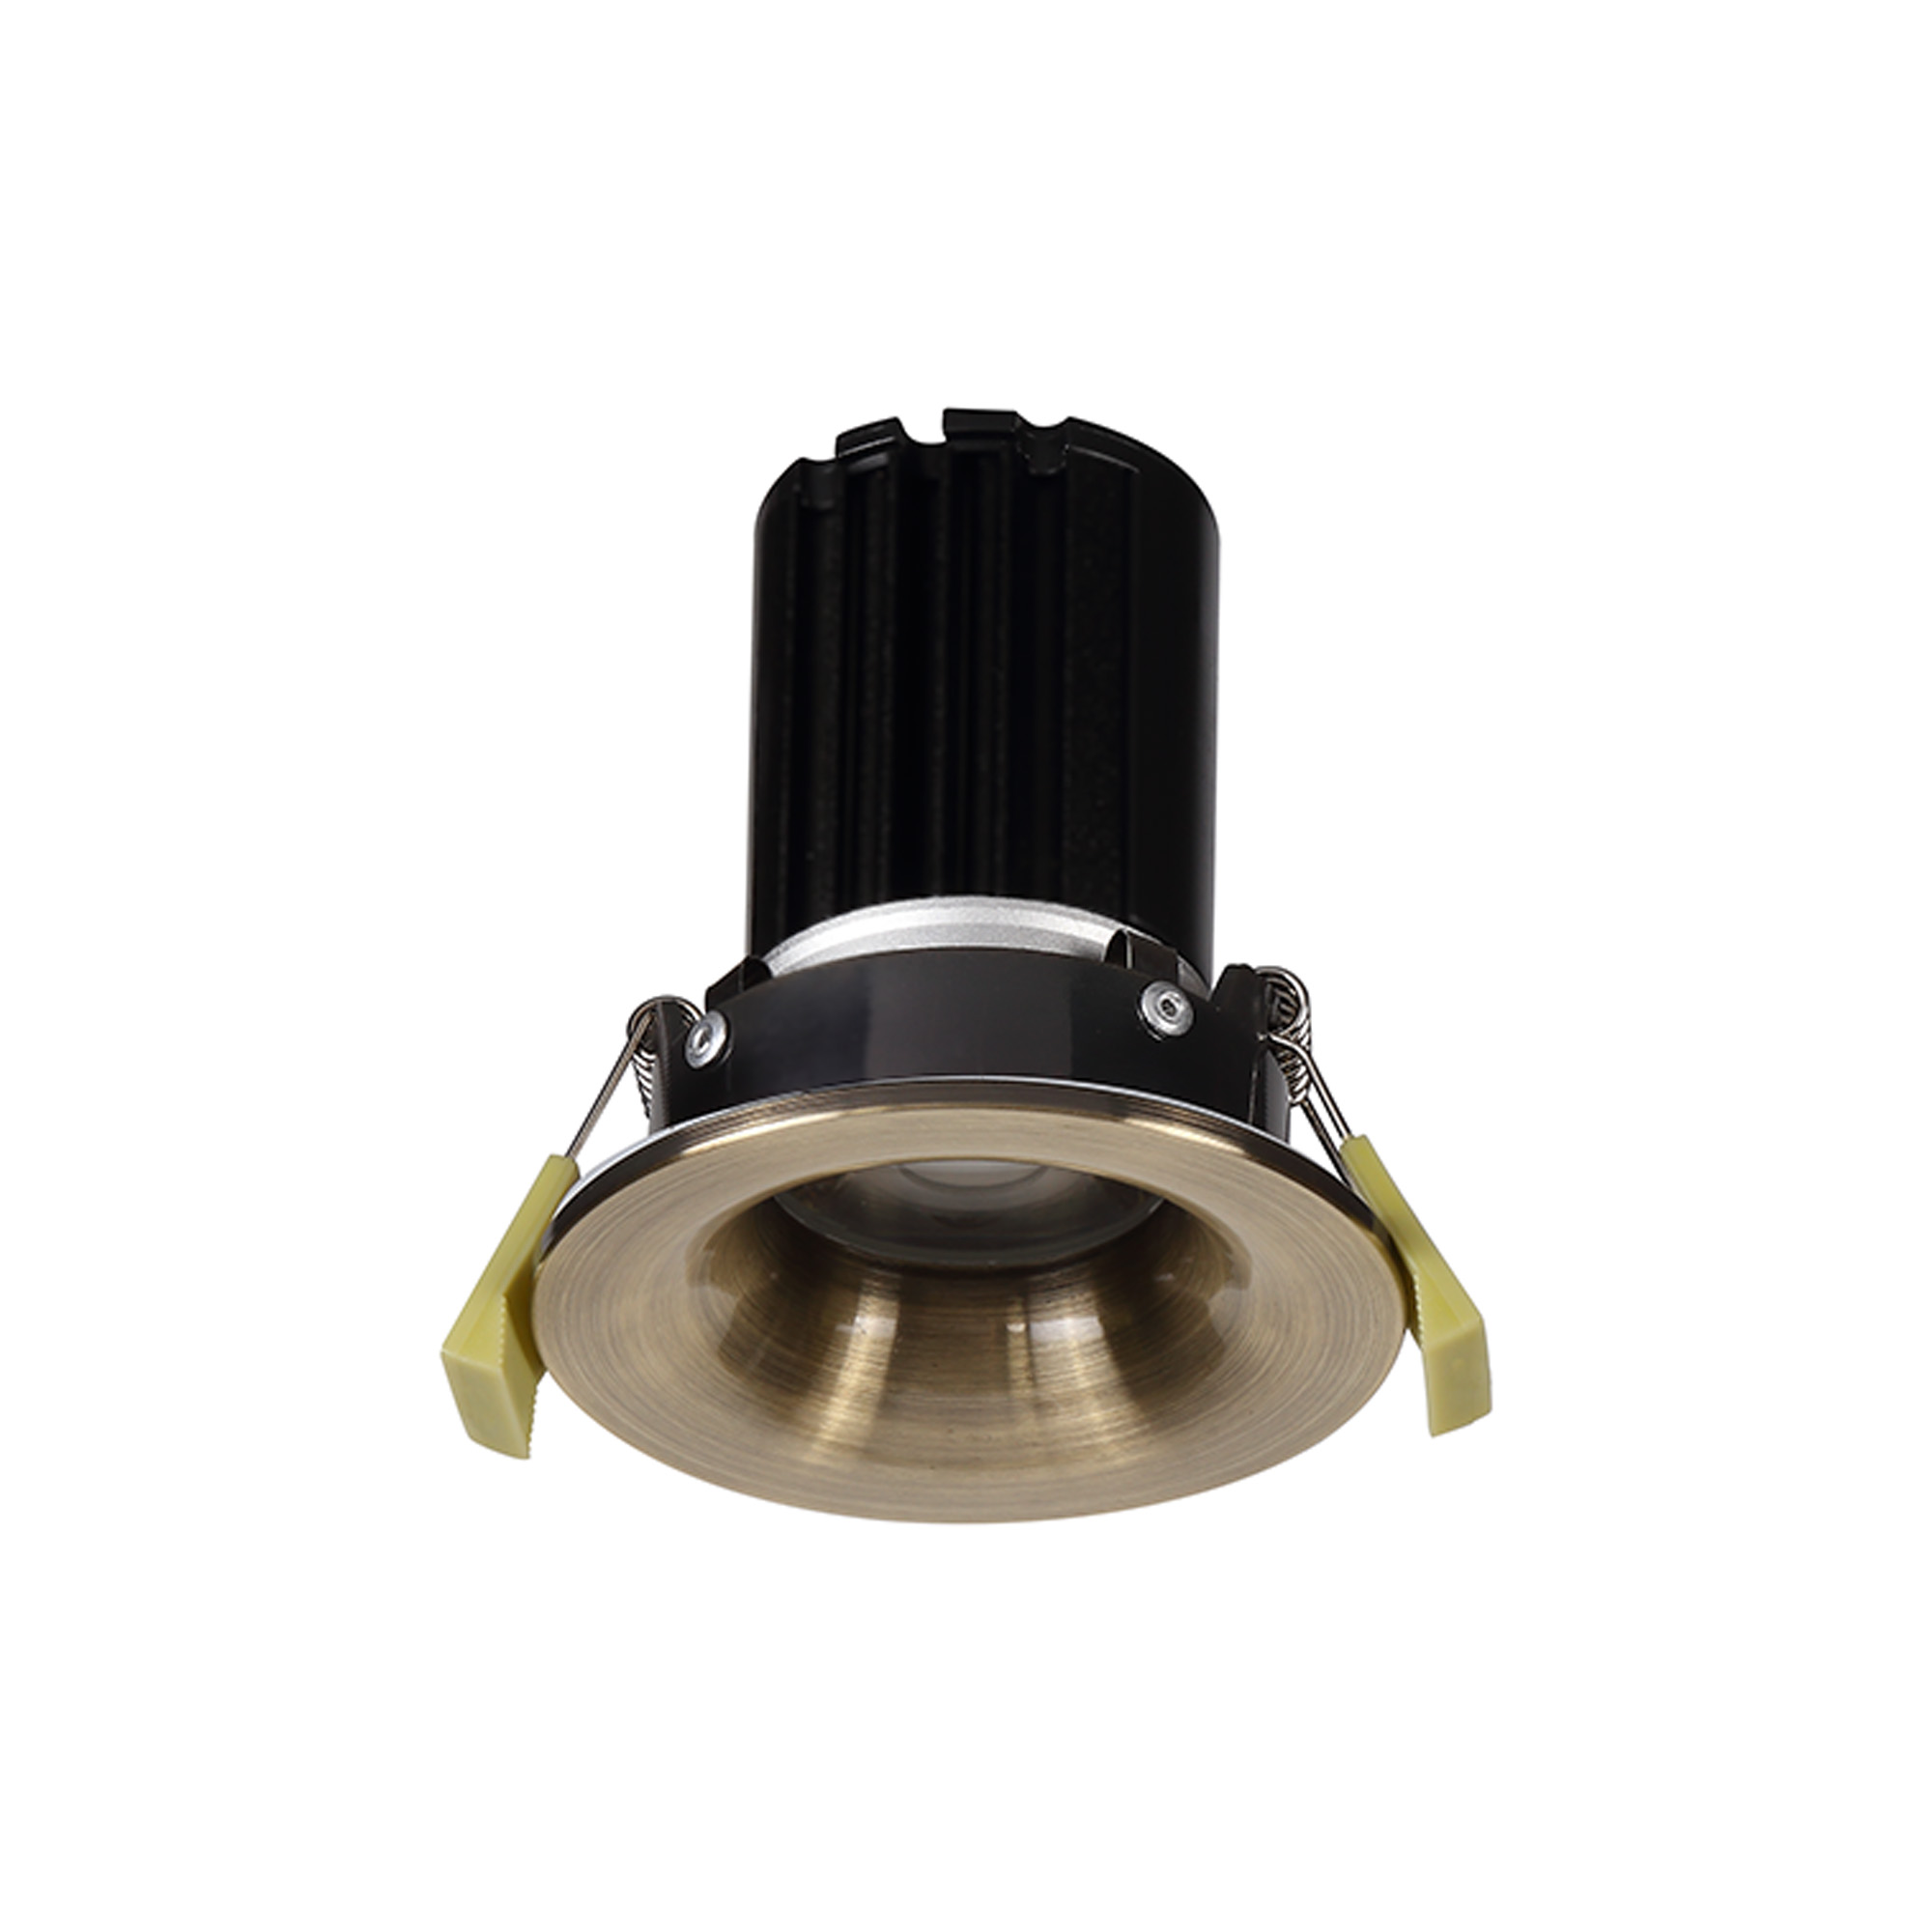 DM202496  Bruve 12 Tridonic powered 12W 3000K 1200lm 36° LED Engine,300mA , CRI>90 LED Engine Antique Brass Fixed Round Recessed Downlight, Inner Glass cover, IP65